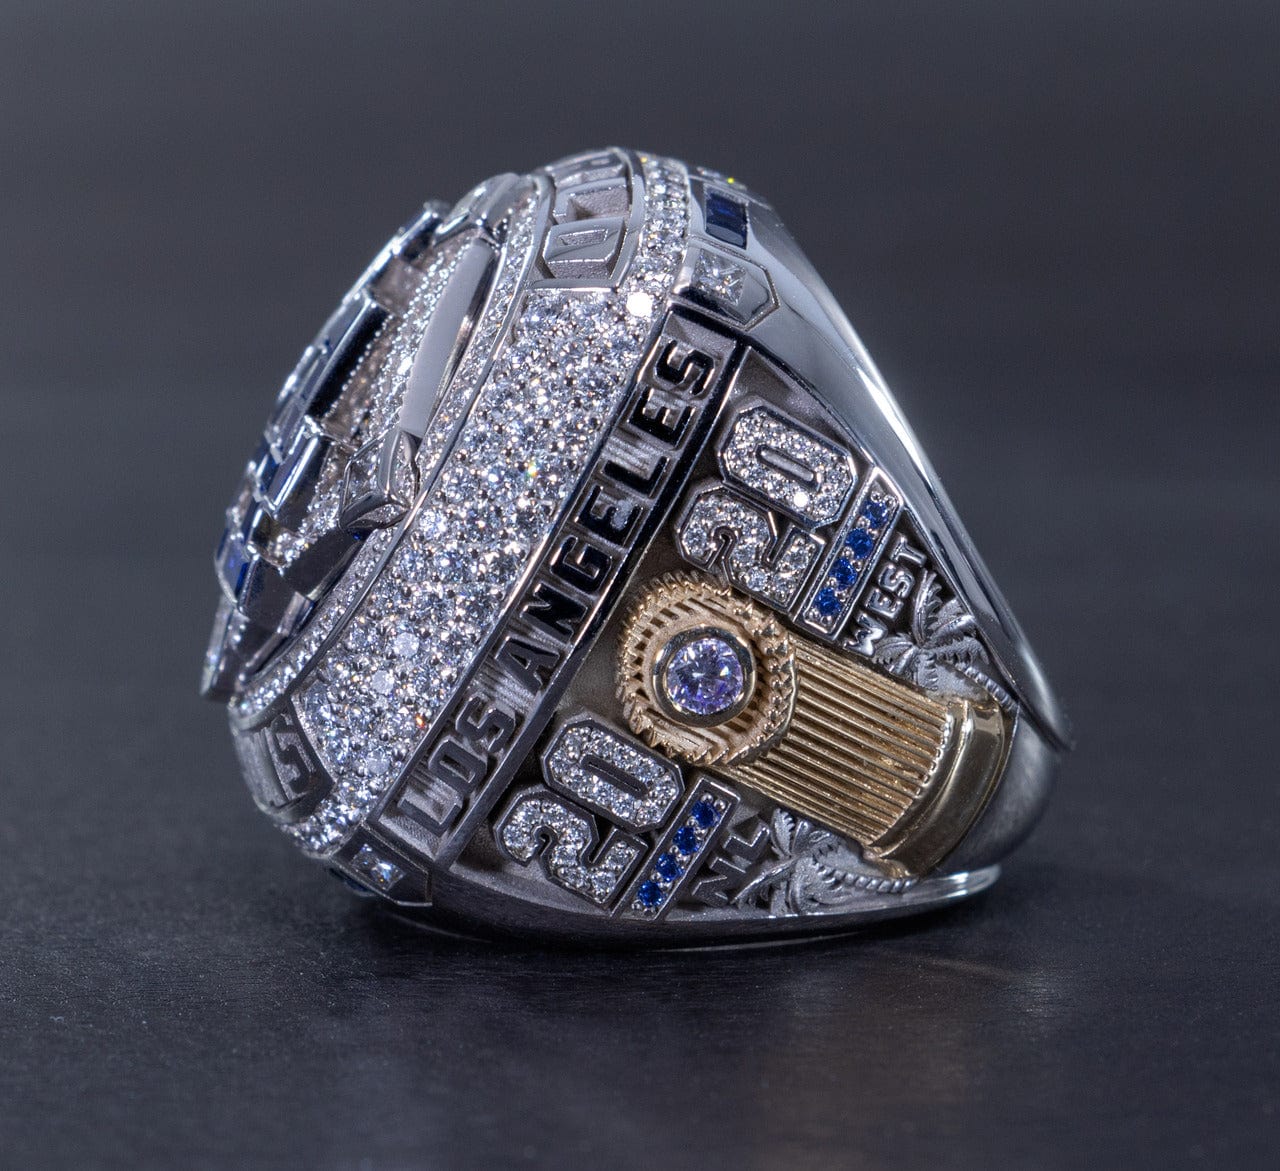 2020 Los Angeles Dodgers Championship Ring